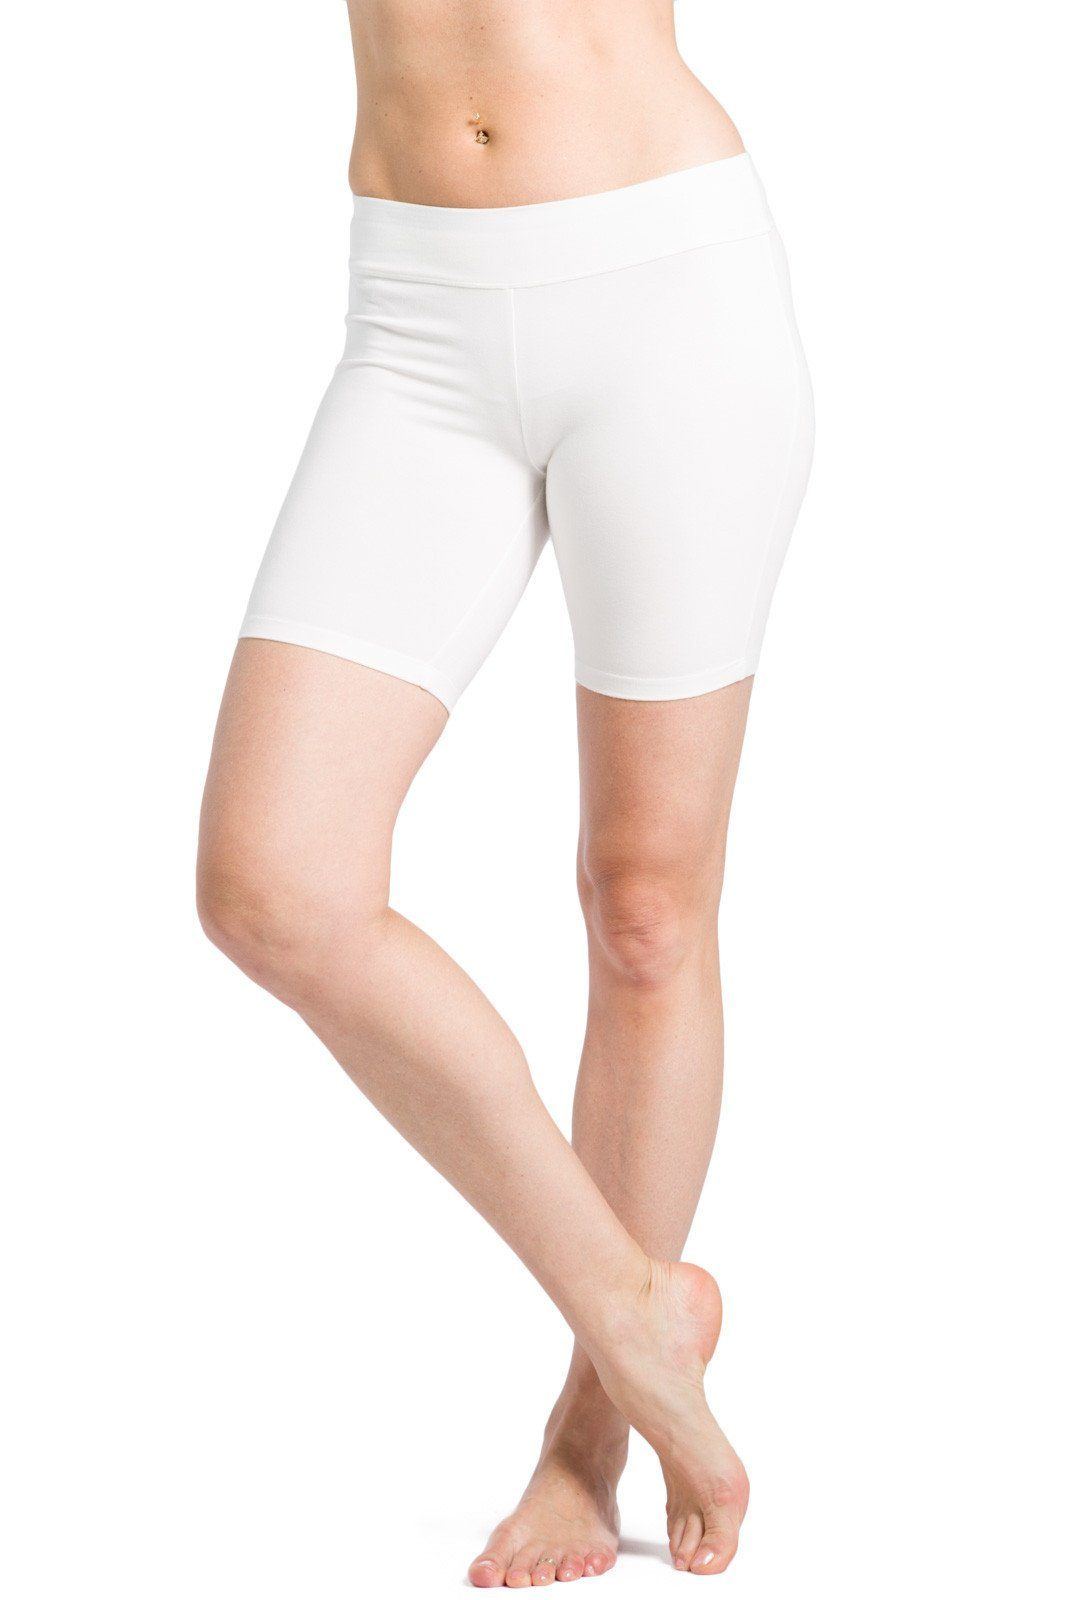 Leggings and Shorts - Women's Activewear